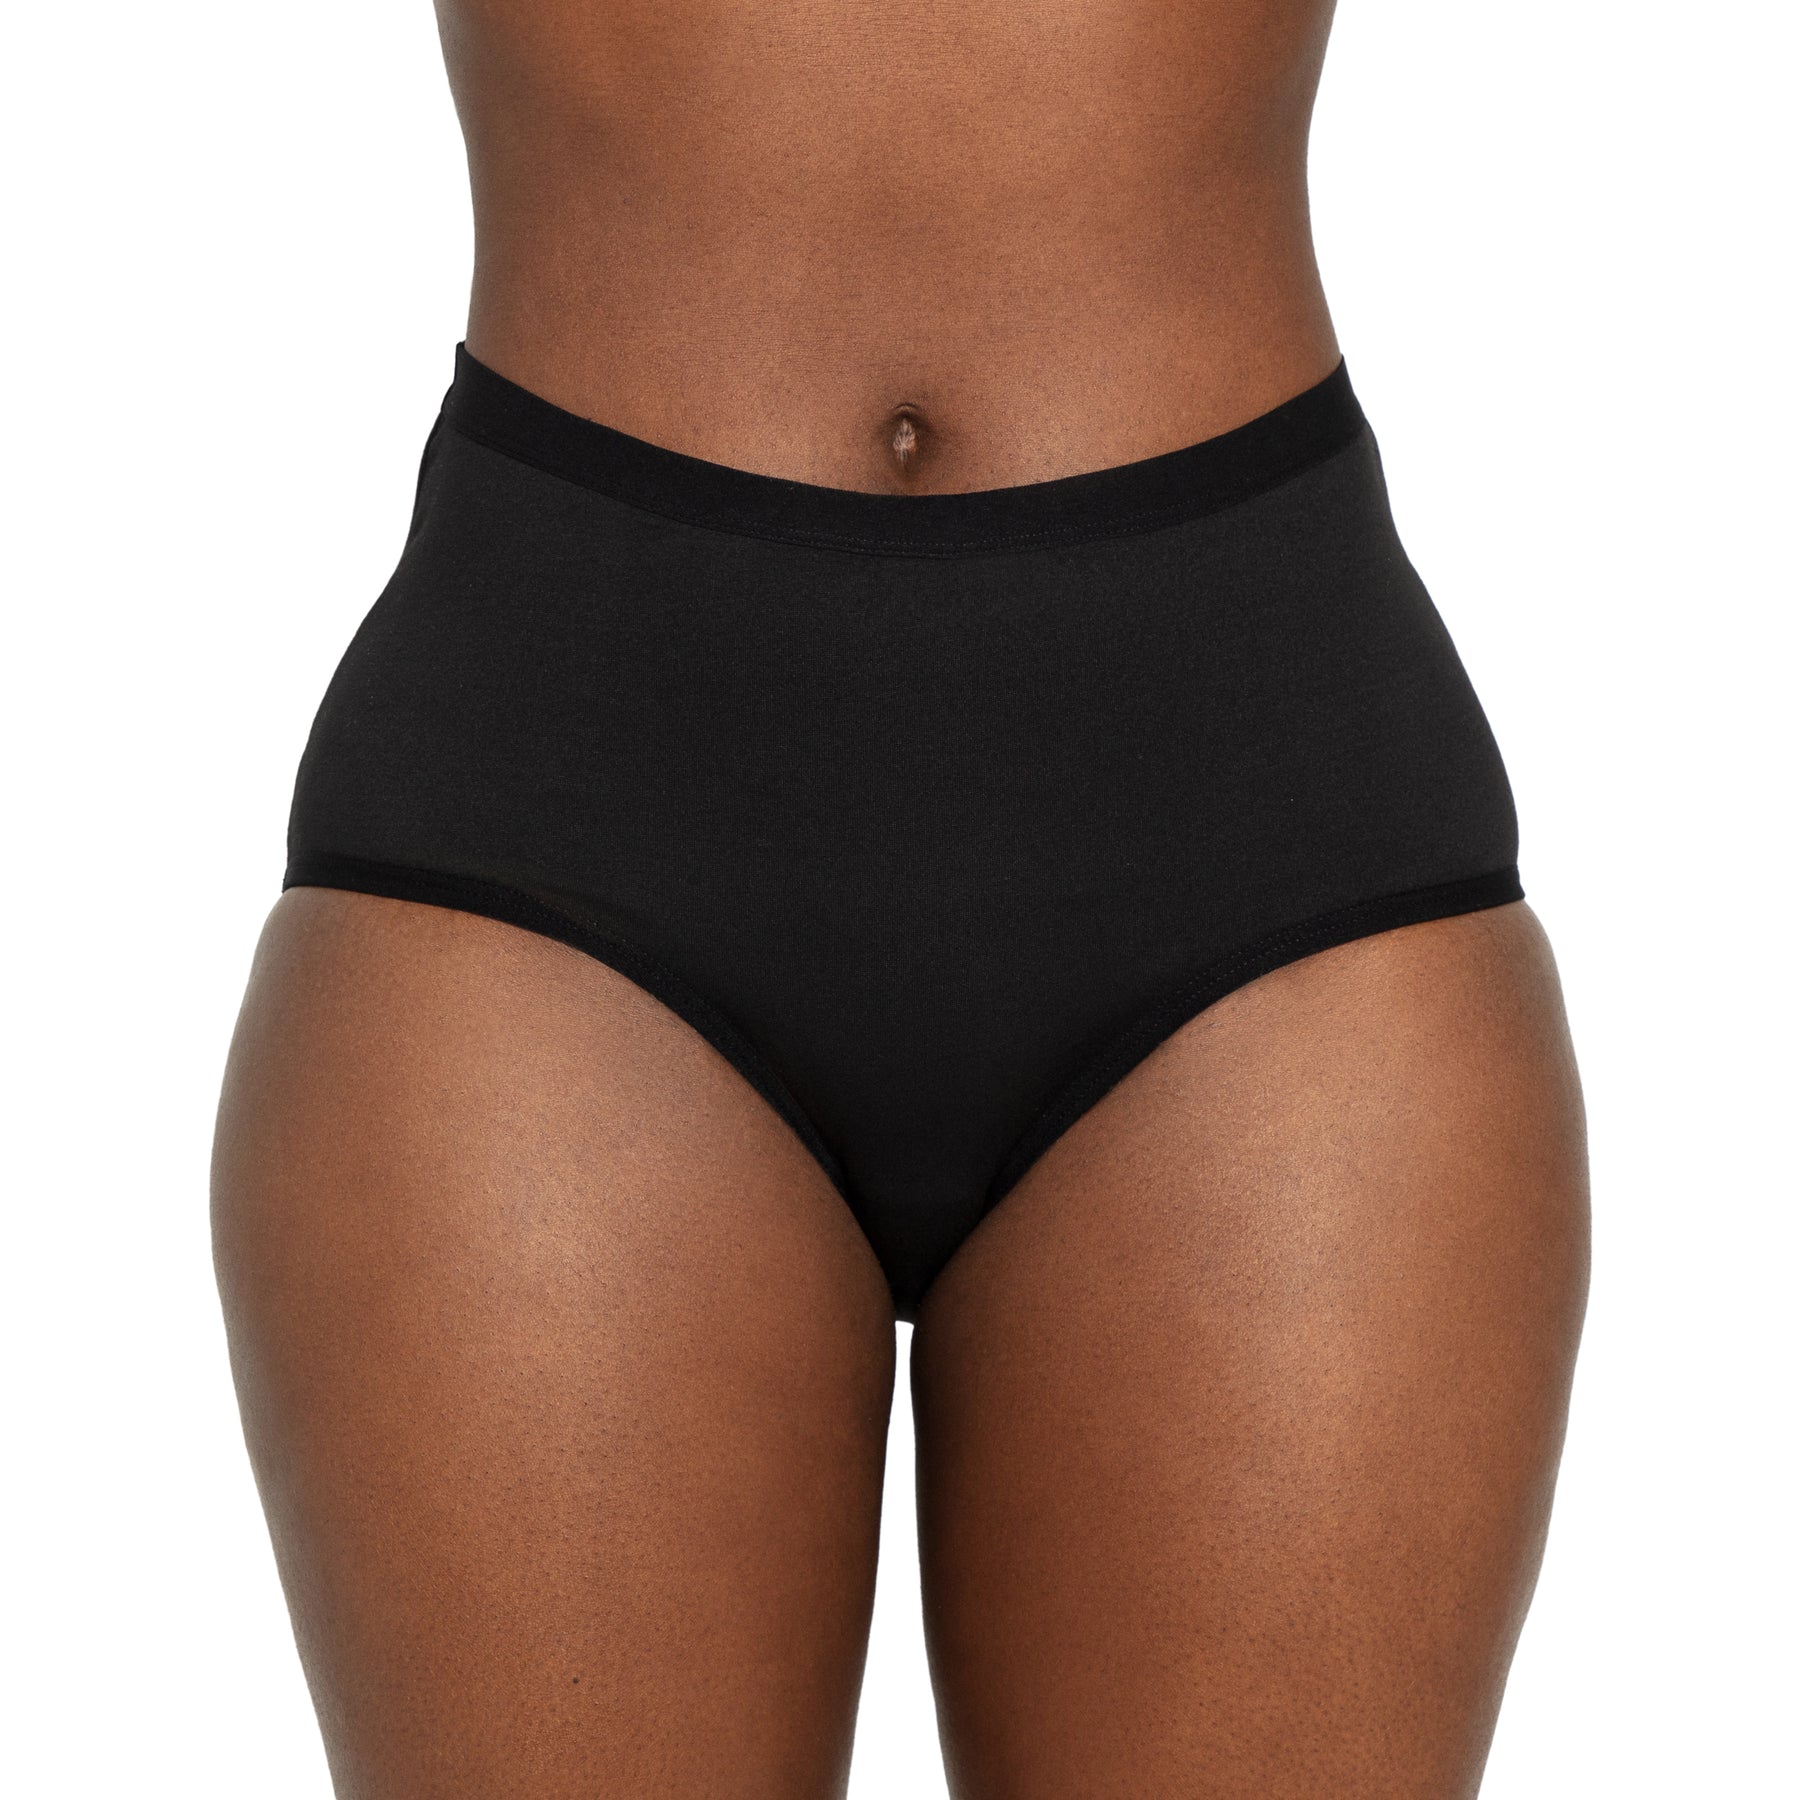 The High Waisted Period. in Microfiber For Medium Flows – The